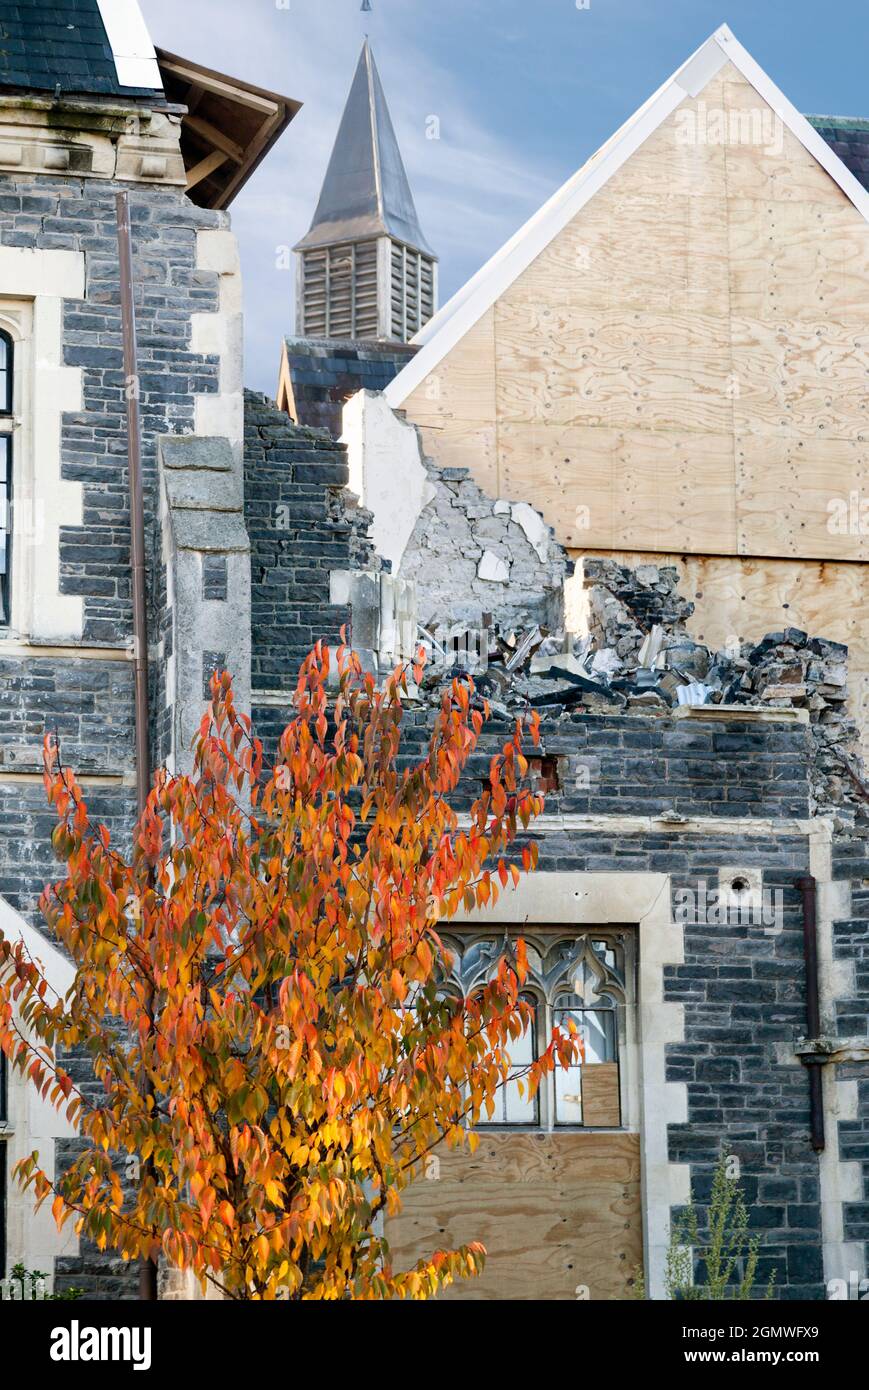 Christchurch, New Zealand - 17 May 2012 A major earthquake, registering 6.3 on the Richter scale, hit Christchurch, New Zealand on 22 February 2011. I Stock Photo